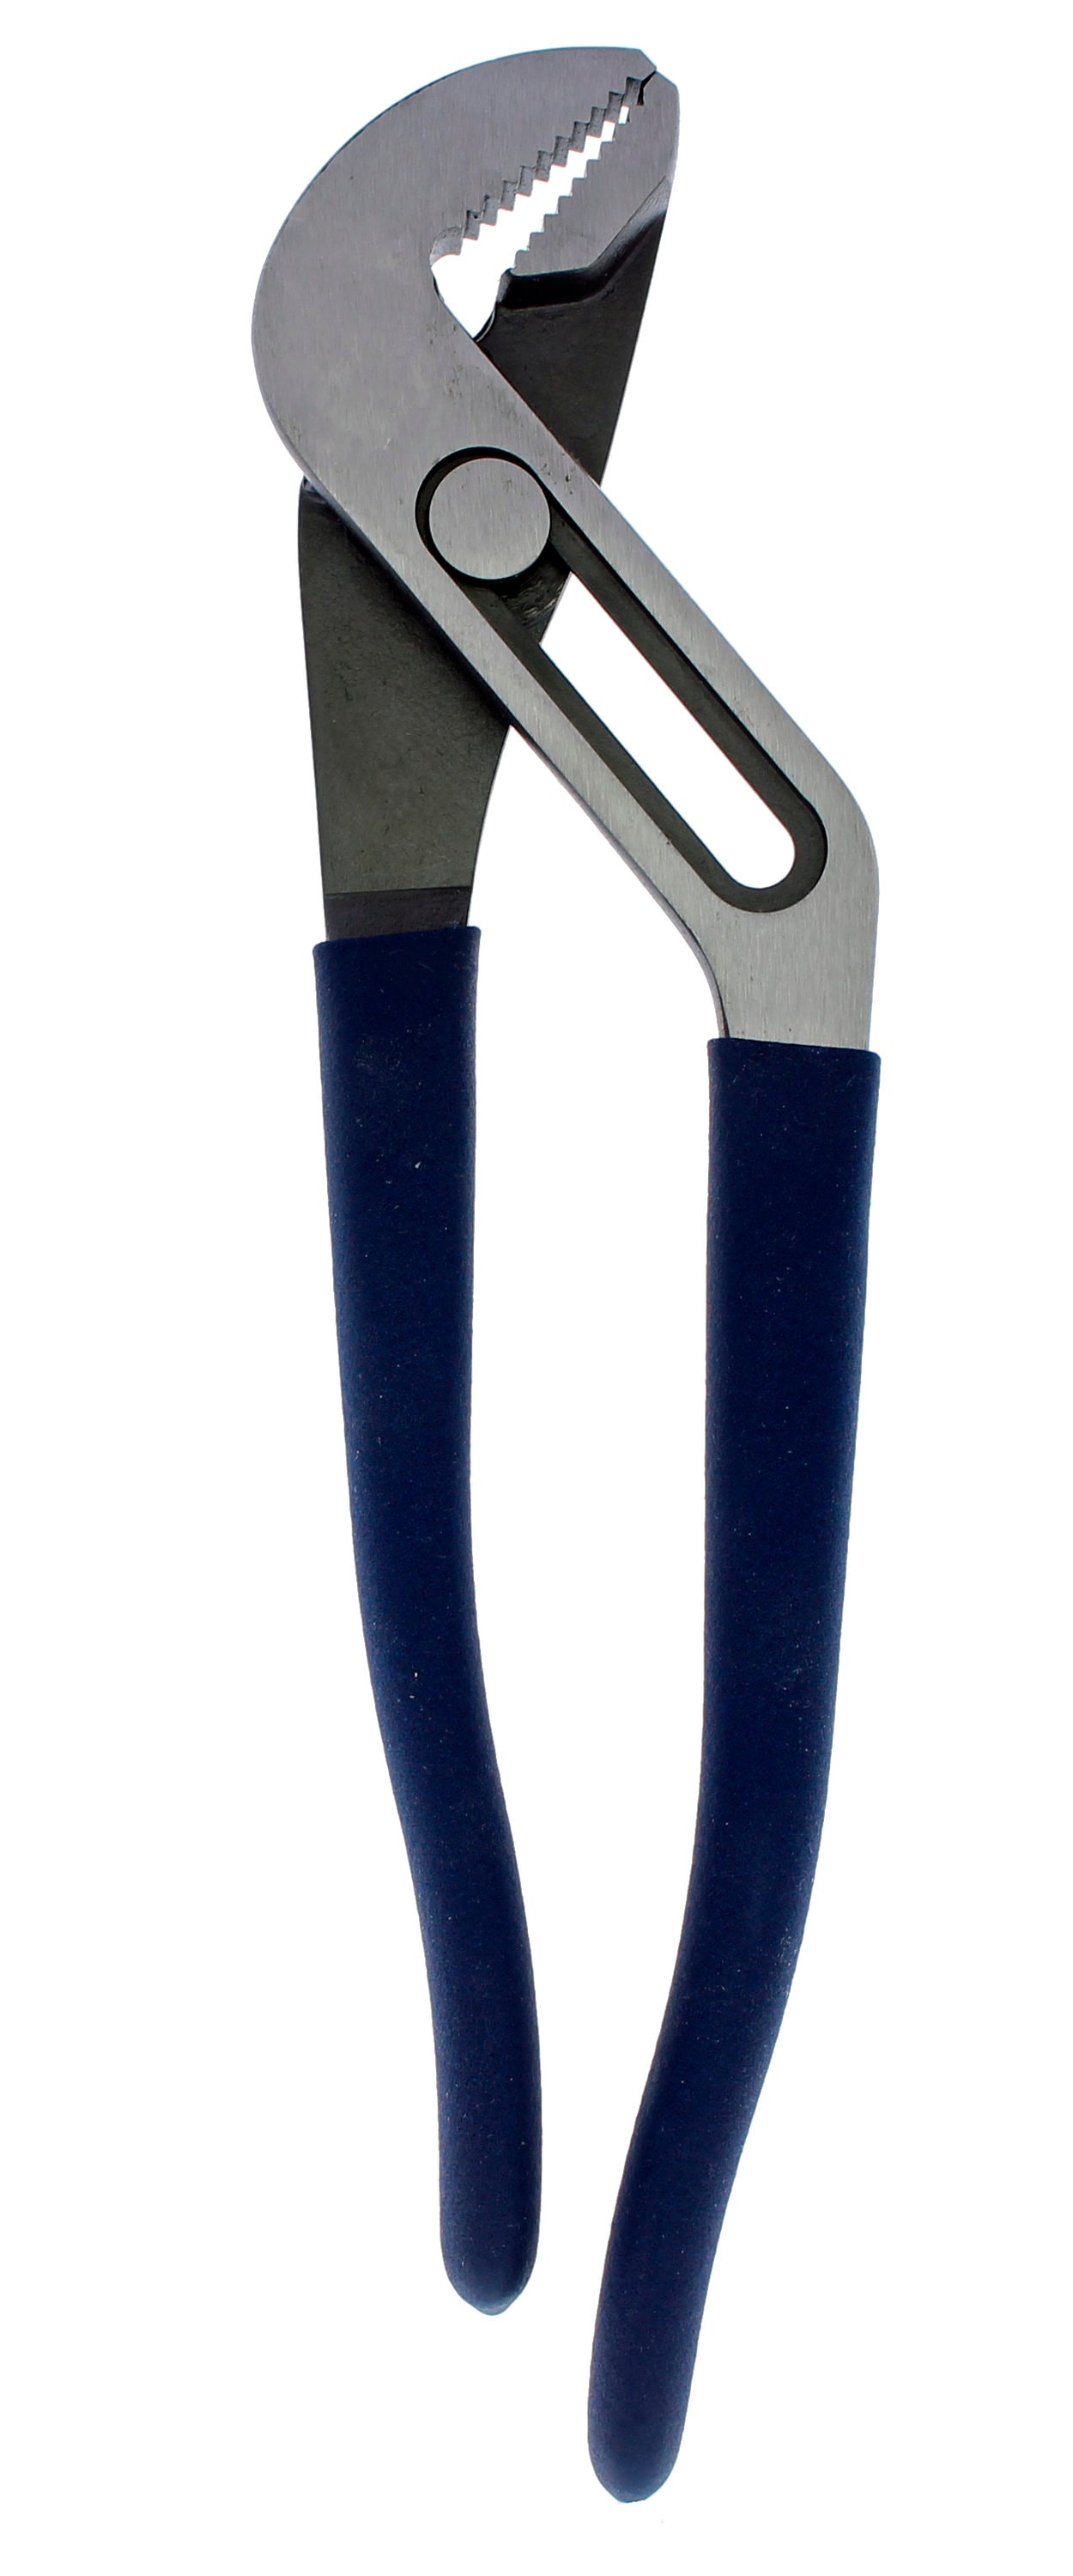 1-1/2 in Straight High Carbon Steel Jaw Ideal 35-420 Adjustable Tongue and Groove Plier 9-1/2 in OAL